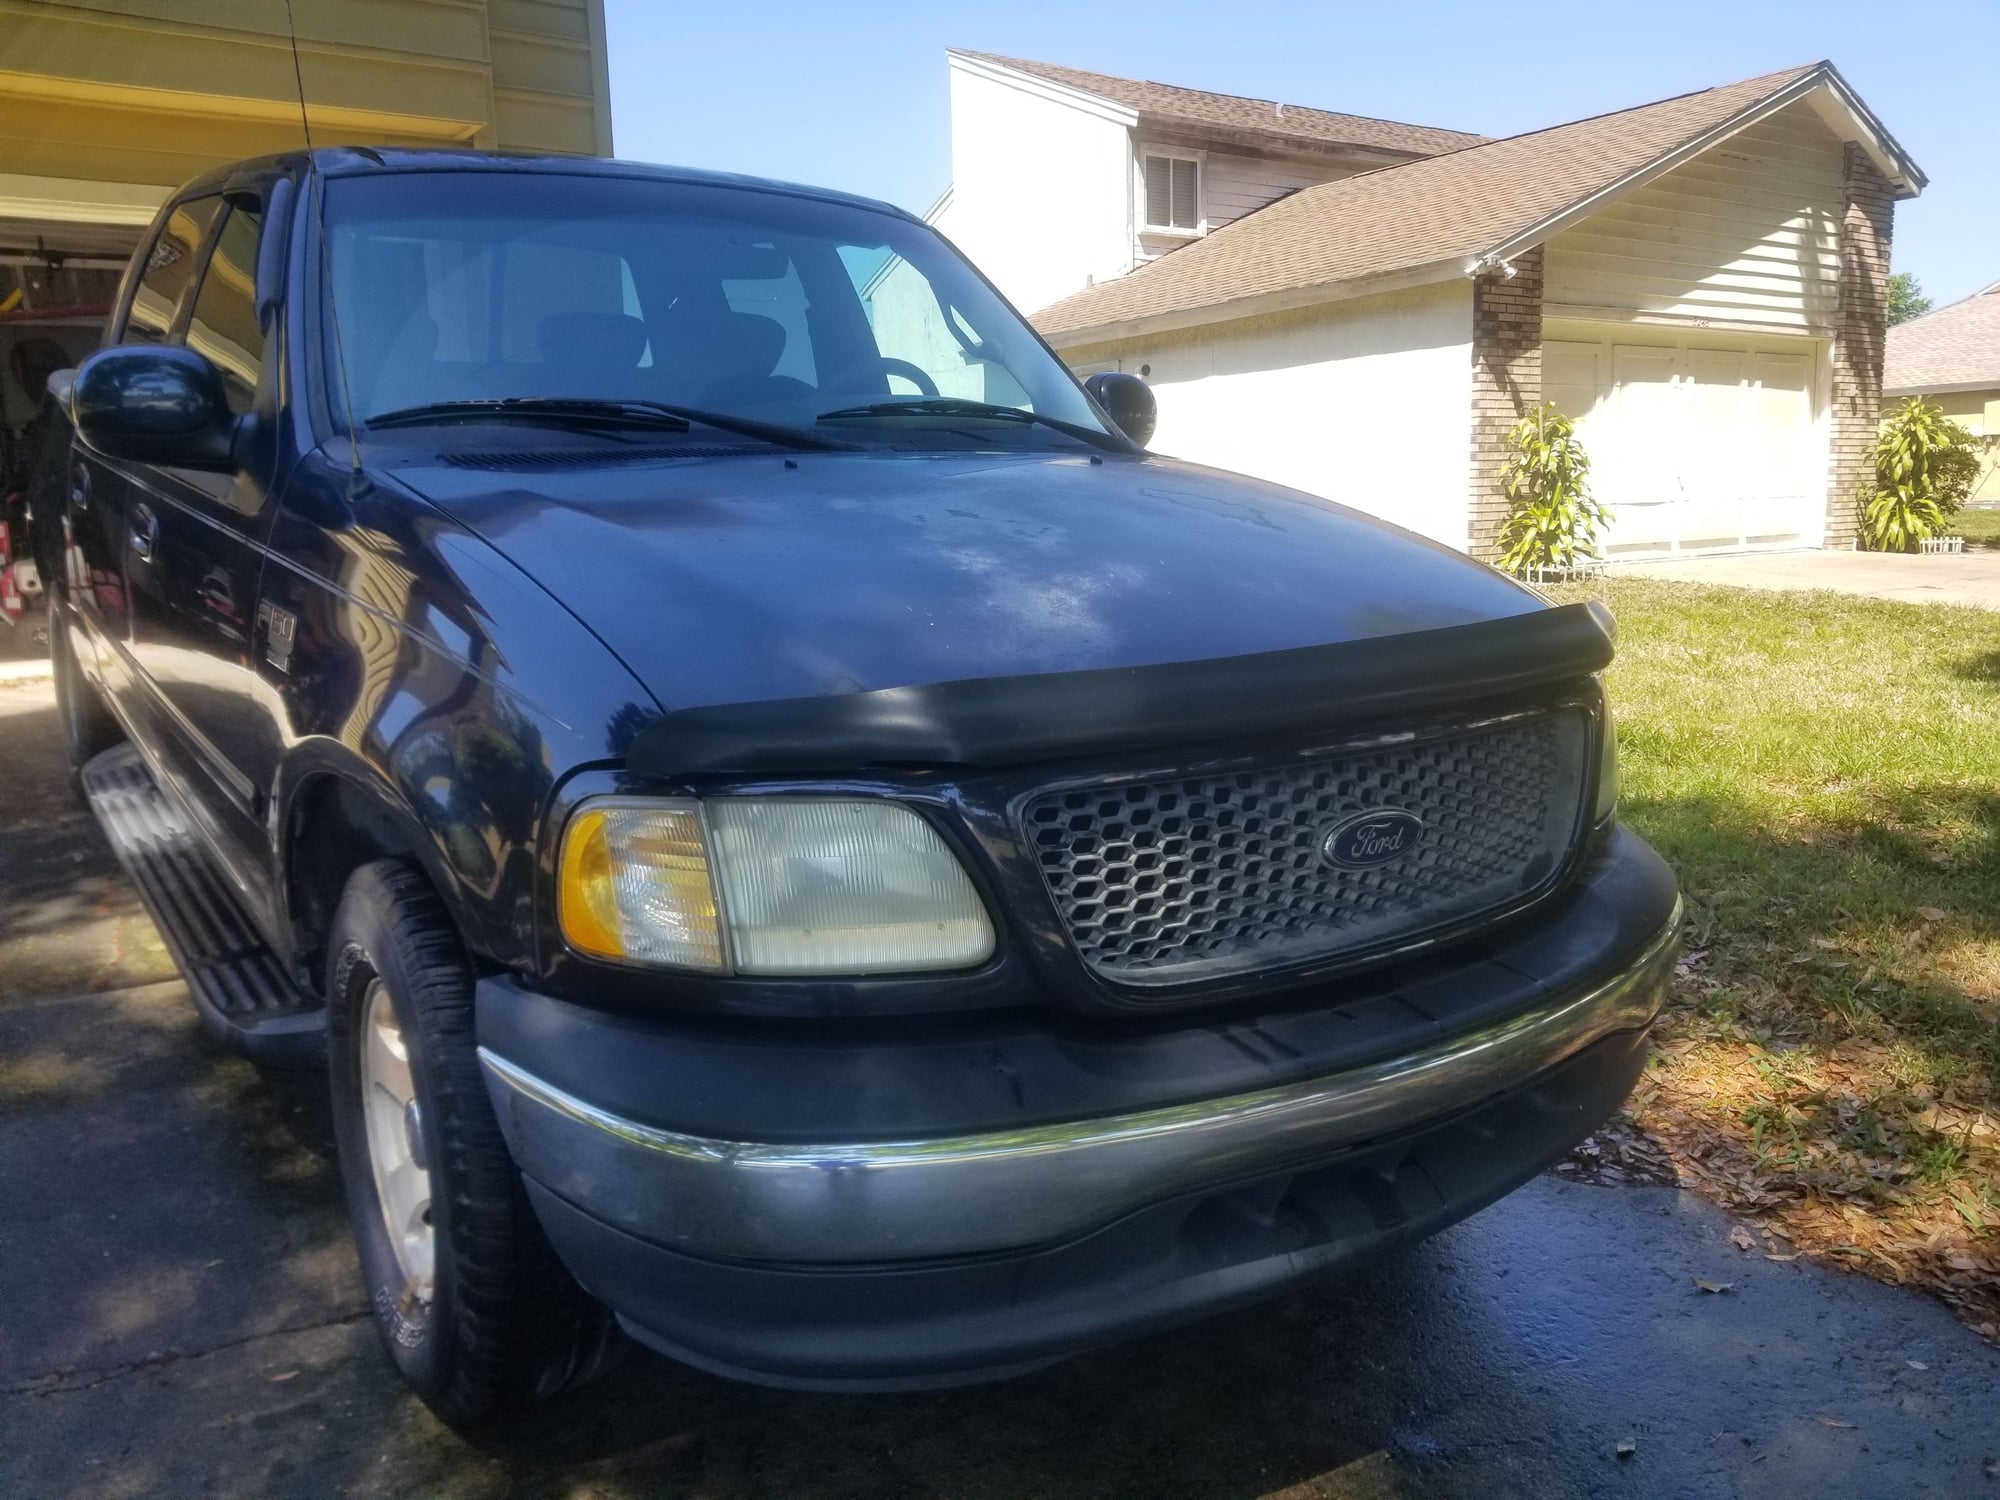 2001 Ford F-150 - 2001 F150 XLT Supercrew - Used - VIN 1ftrv07621kc61135 - 254,000 Miles - 8 cyl - 2WD - Automatic - Truck - Blue - Orlando, FL 32819, United States